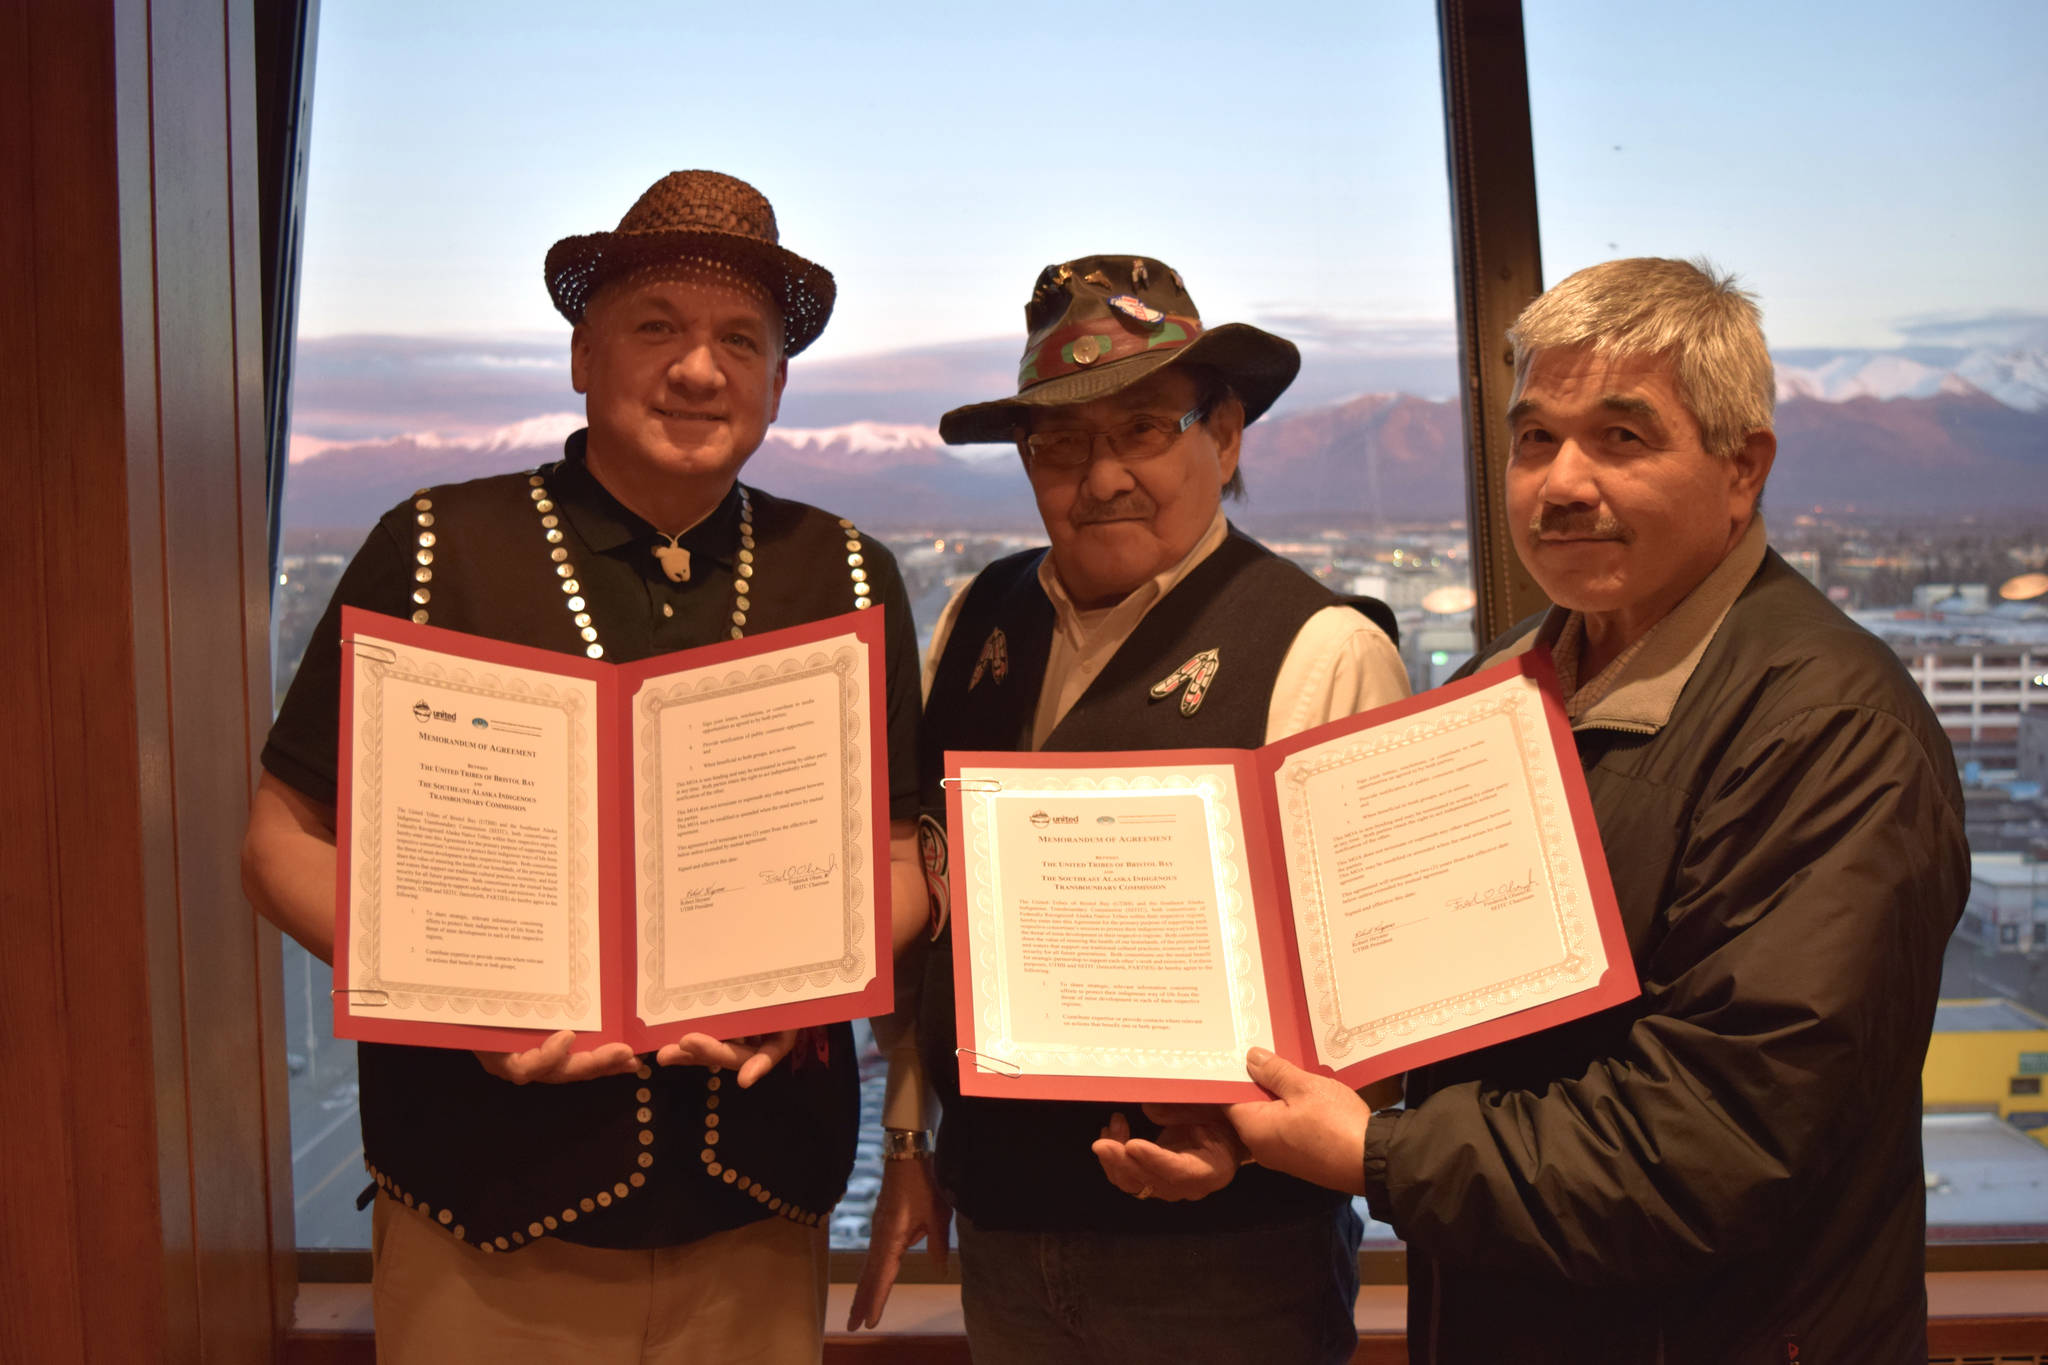 Southeast Alaska Indigenous Transboundary Commission (SEITC) Chariman Frederick Olsen Jr., SEITC Secretary John Morris and United Tribes of Bristol Bay President Robert Heyano show the Memorandum of Agreement uniting the two groups in their efforts to oppose mining projects on salmon watersheds. (Courtesy Photo | Molly Dischner)